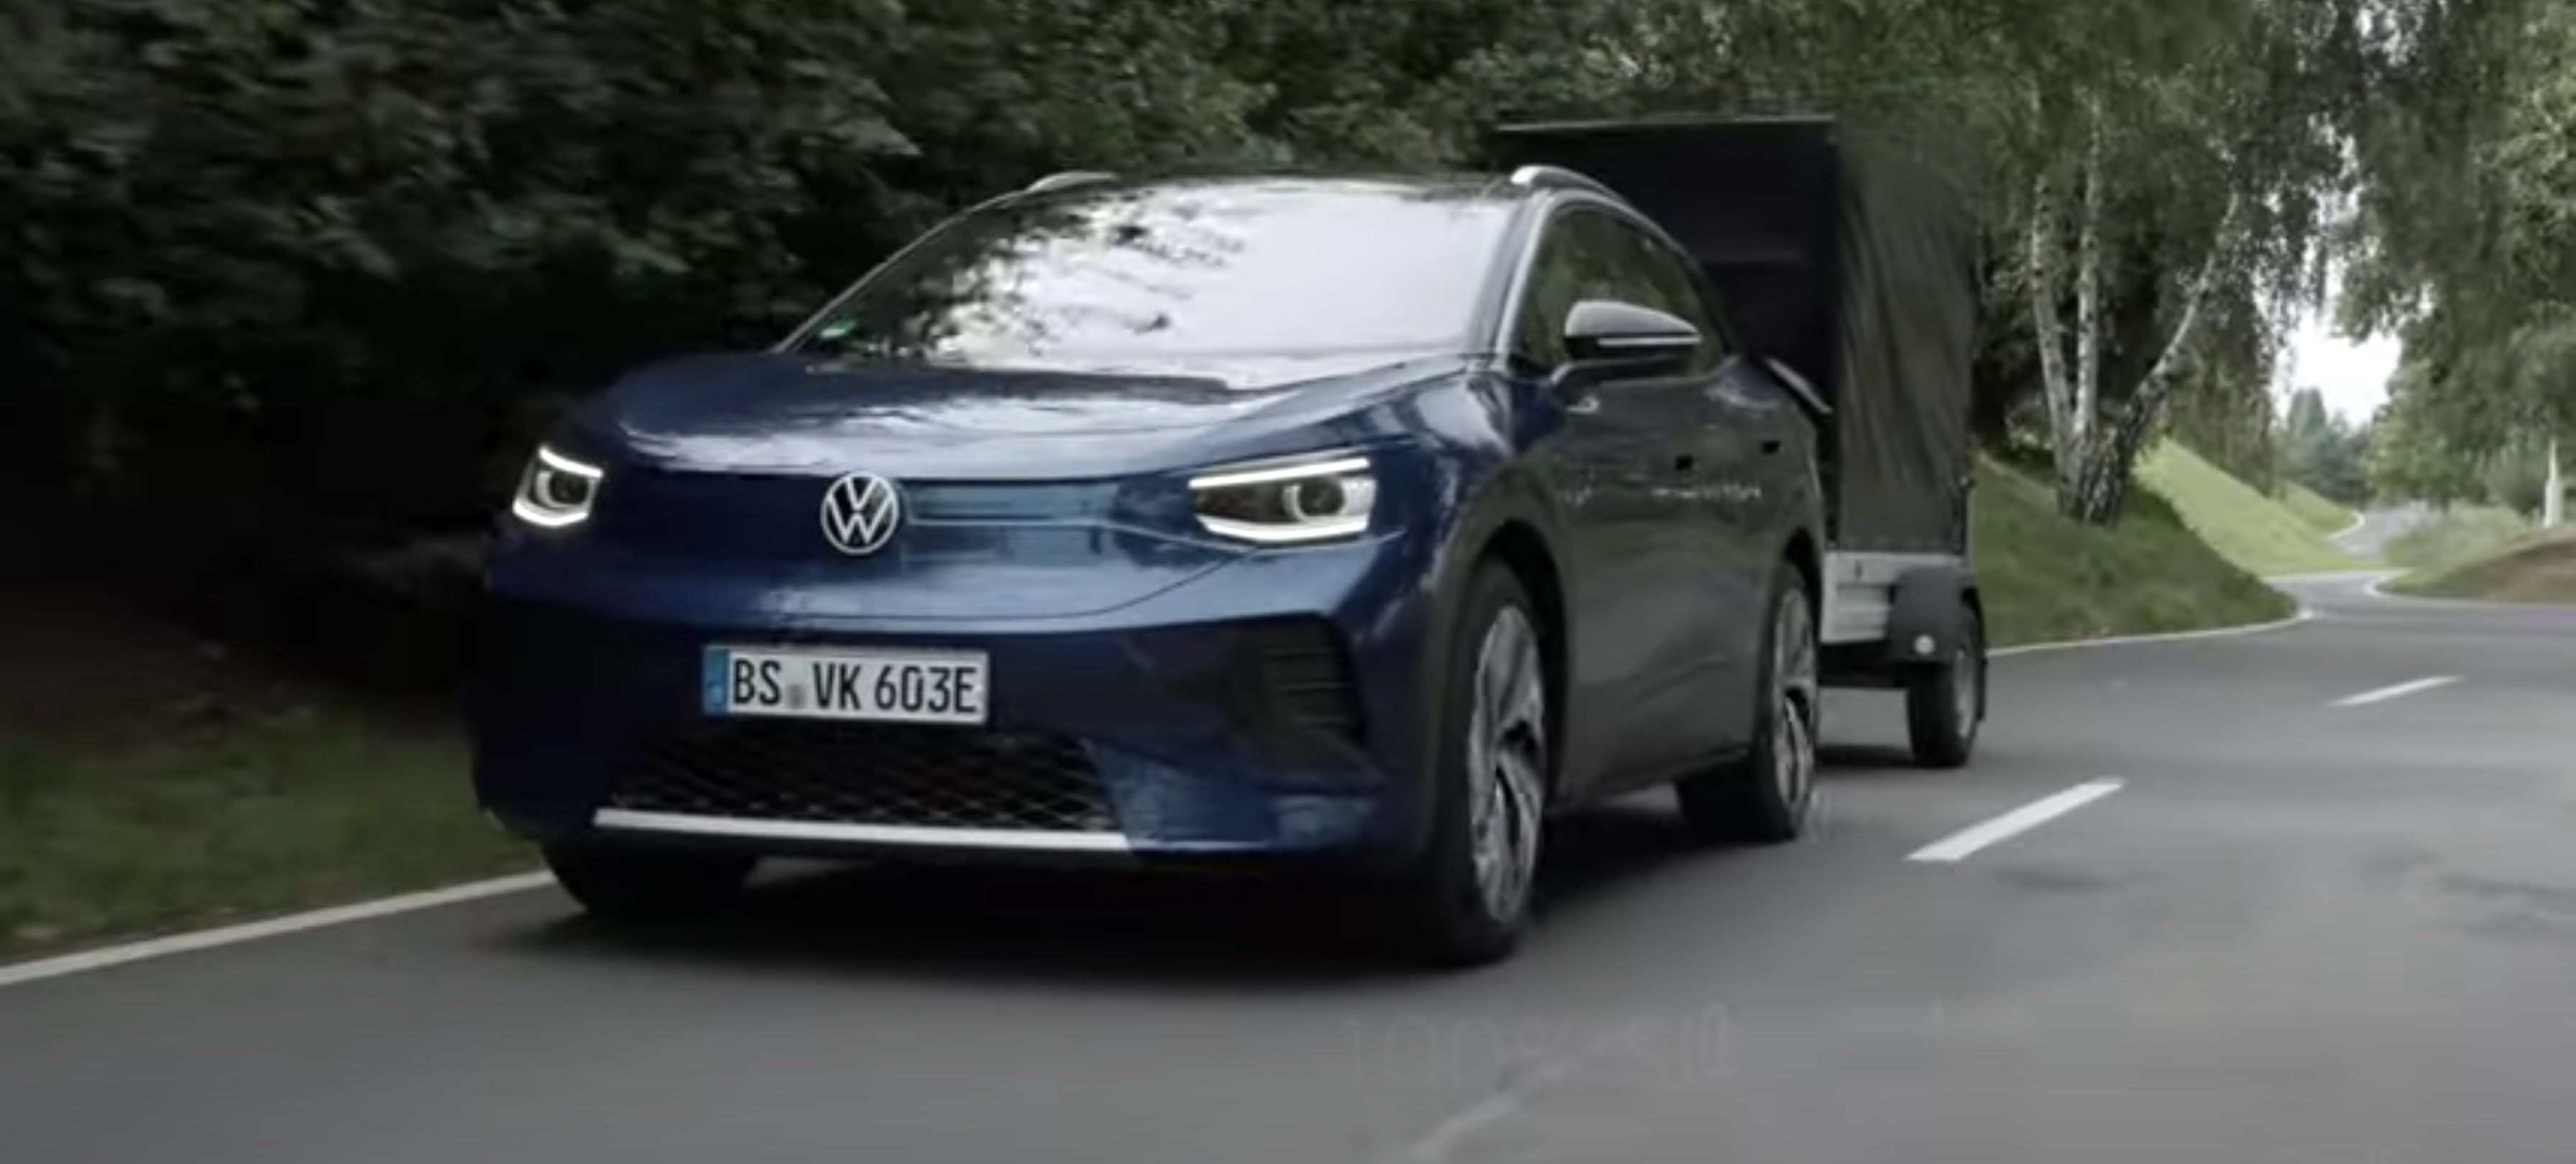 photo of VW plans to sell 500,000 ID.4 electric cars per year image